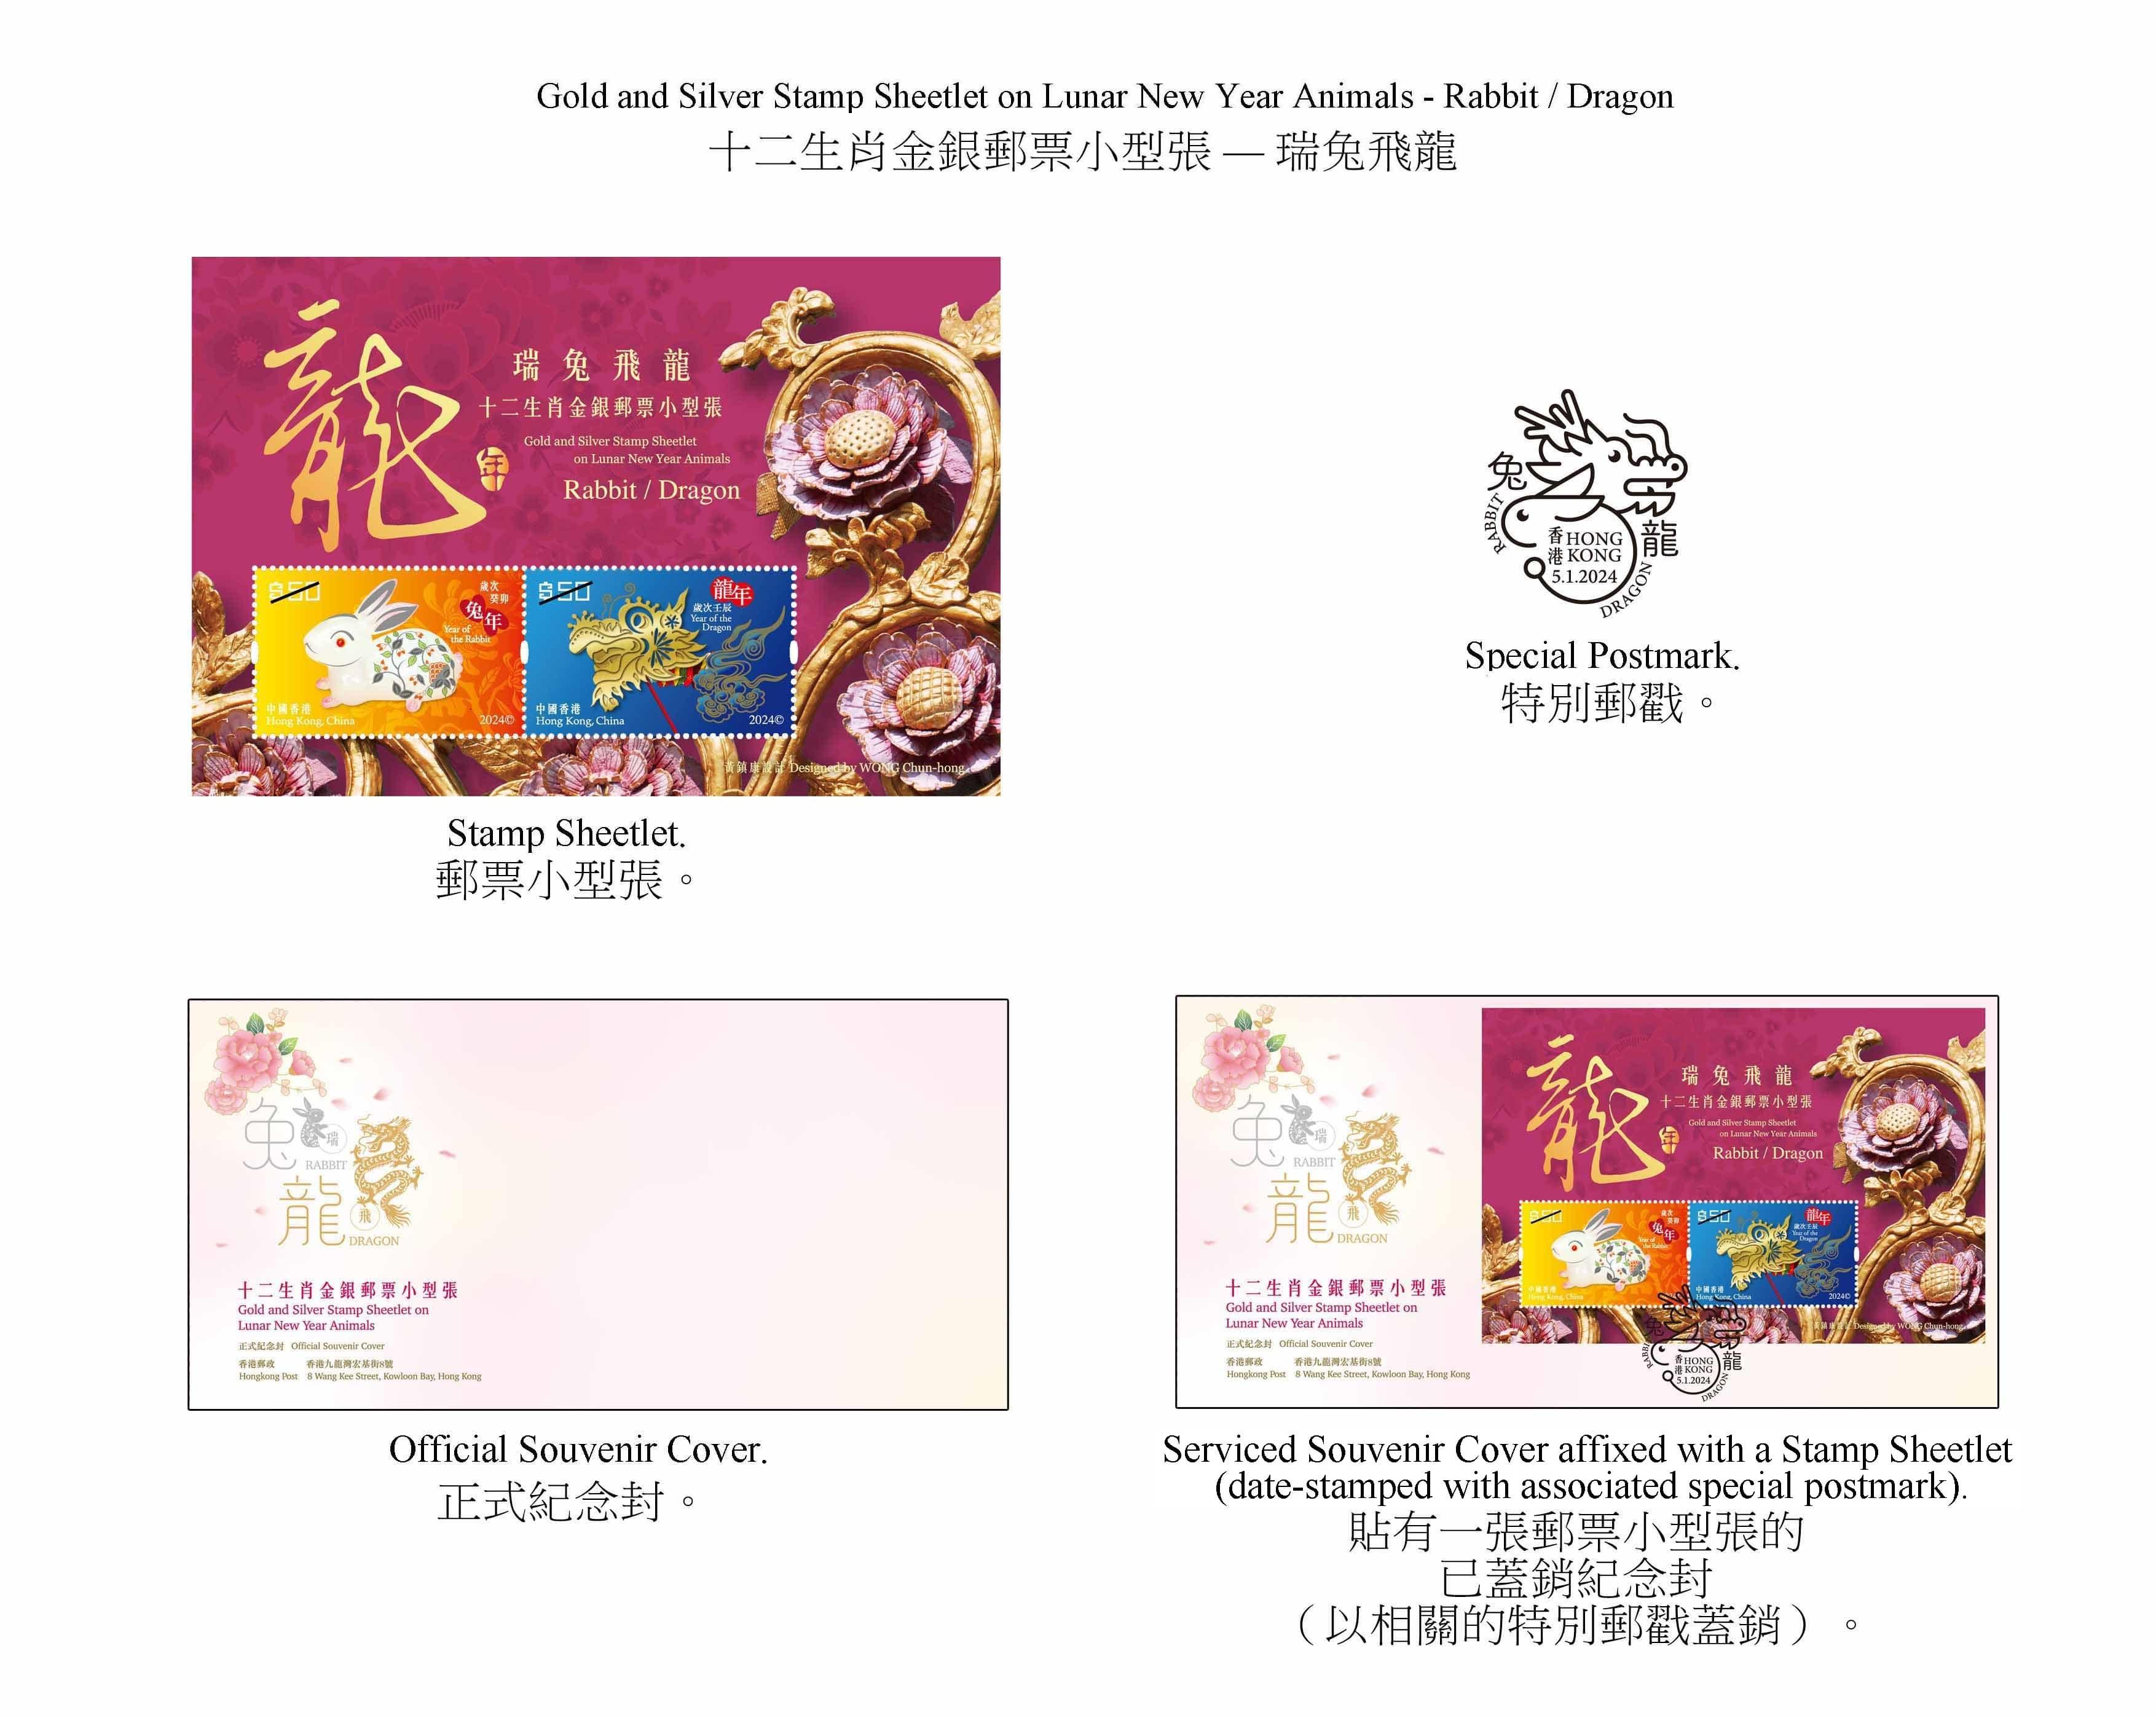 Hongkong Post will launch a special stamp issue and associated philatelic products on the theme of "Year of the Dragon" on January 5, 2024 (Friday). The "Gold and Silver Stamp Sheetlet on Lunar New Year Animals - Ribbit/Dragon" will also be launched on the same day. Photos show the stamp sheetlet, the souvenir covers and the special postmark.
